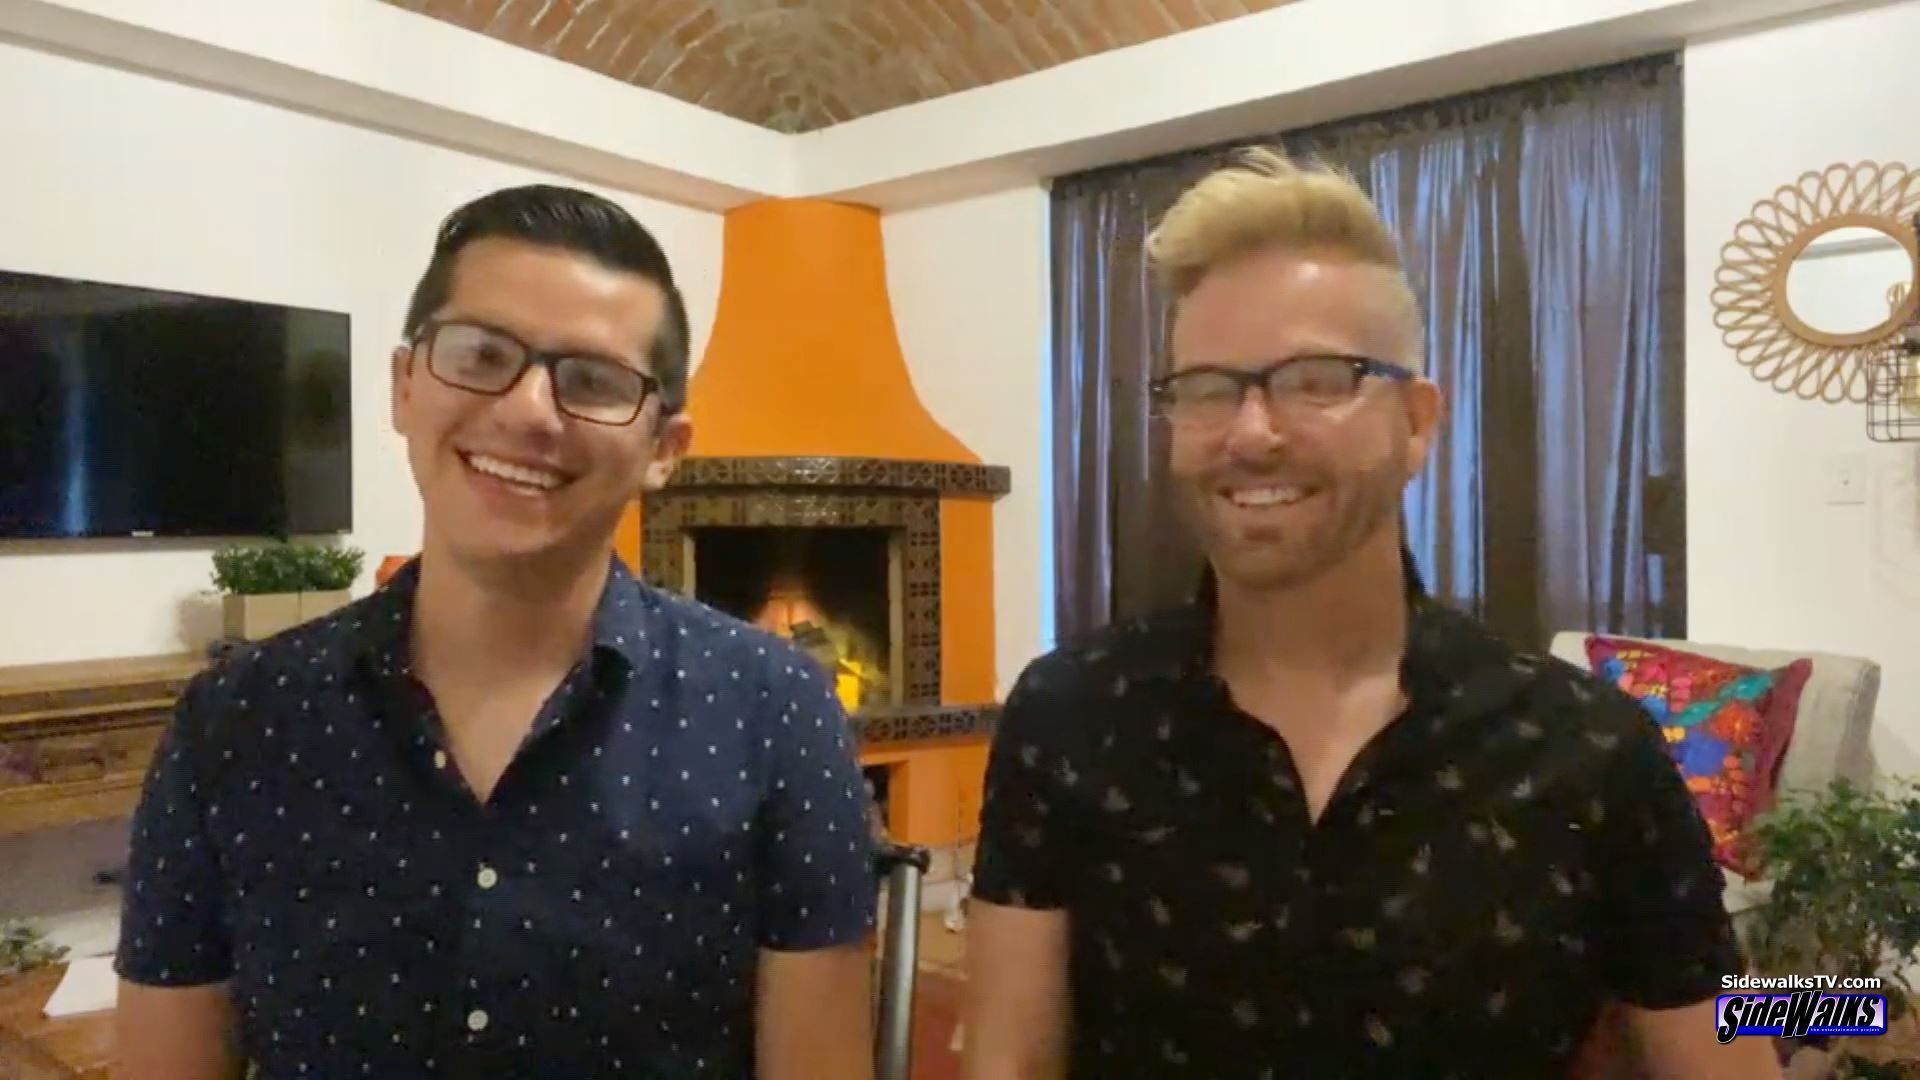 All smiles with 90 Day Fiancé: The Other Way's Armando and Kenneth